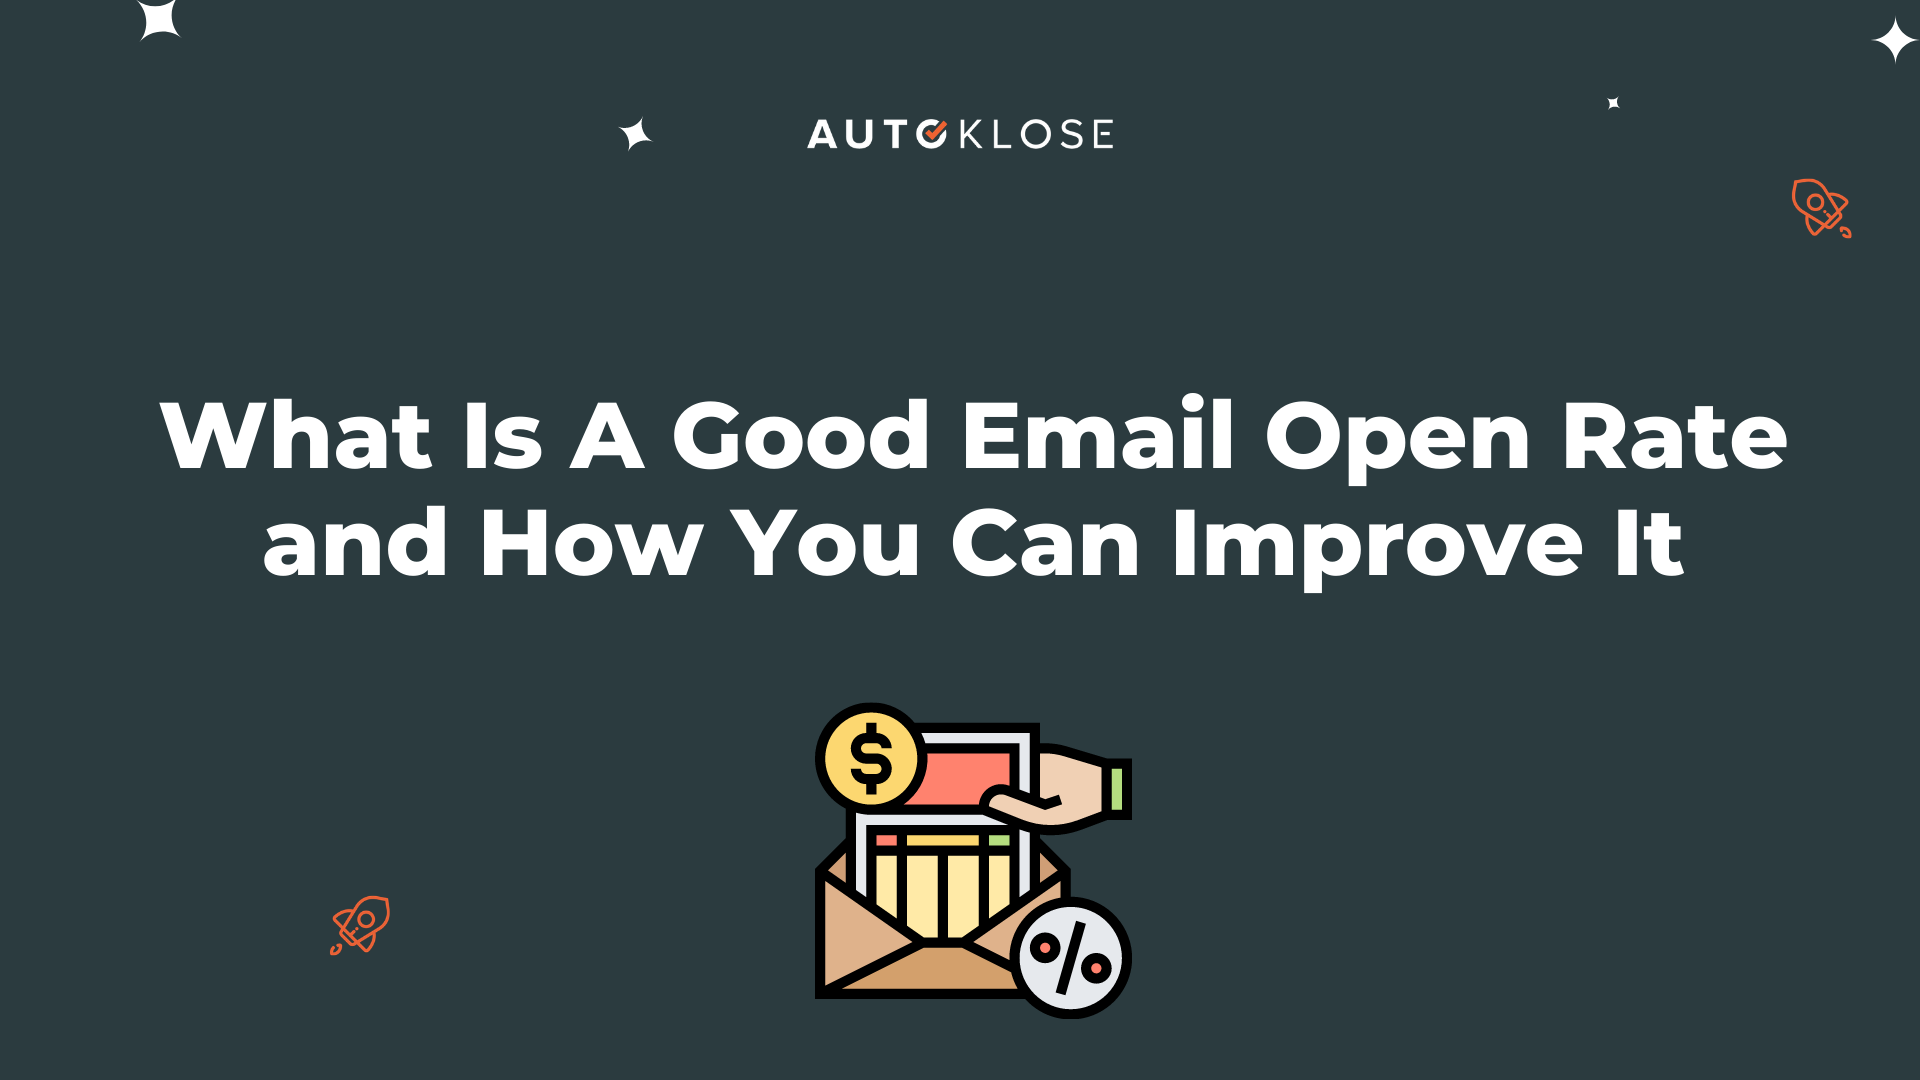 What Is A Good Email Open Rate and How You Can Improve It